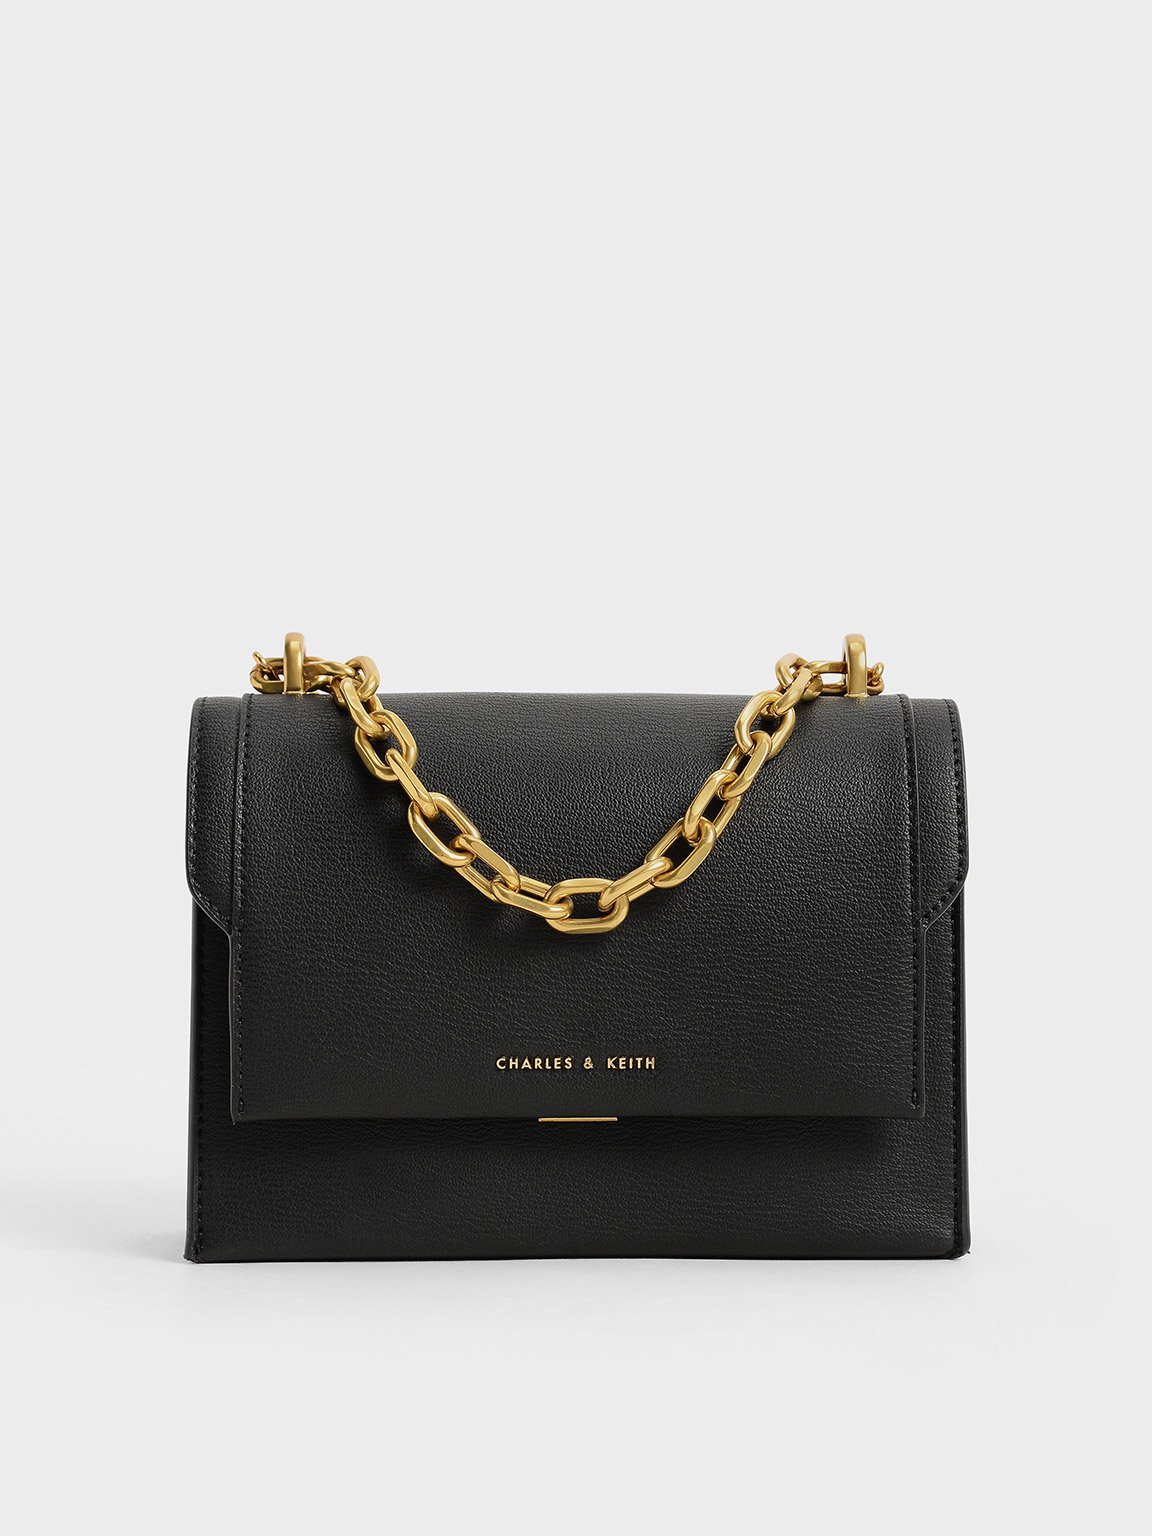 Charles & Keith card holder bag in black with gold chain strap